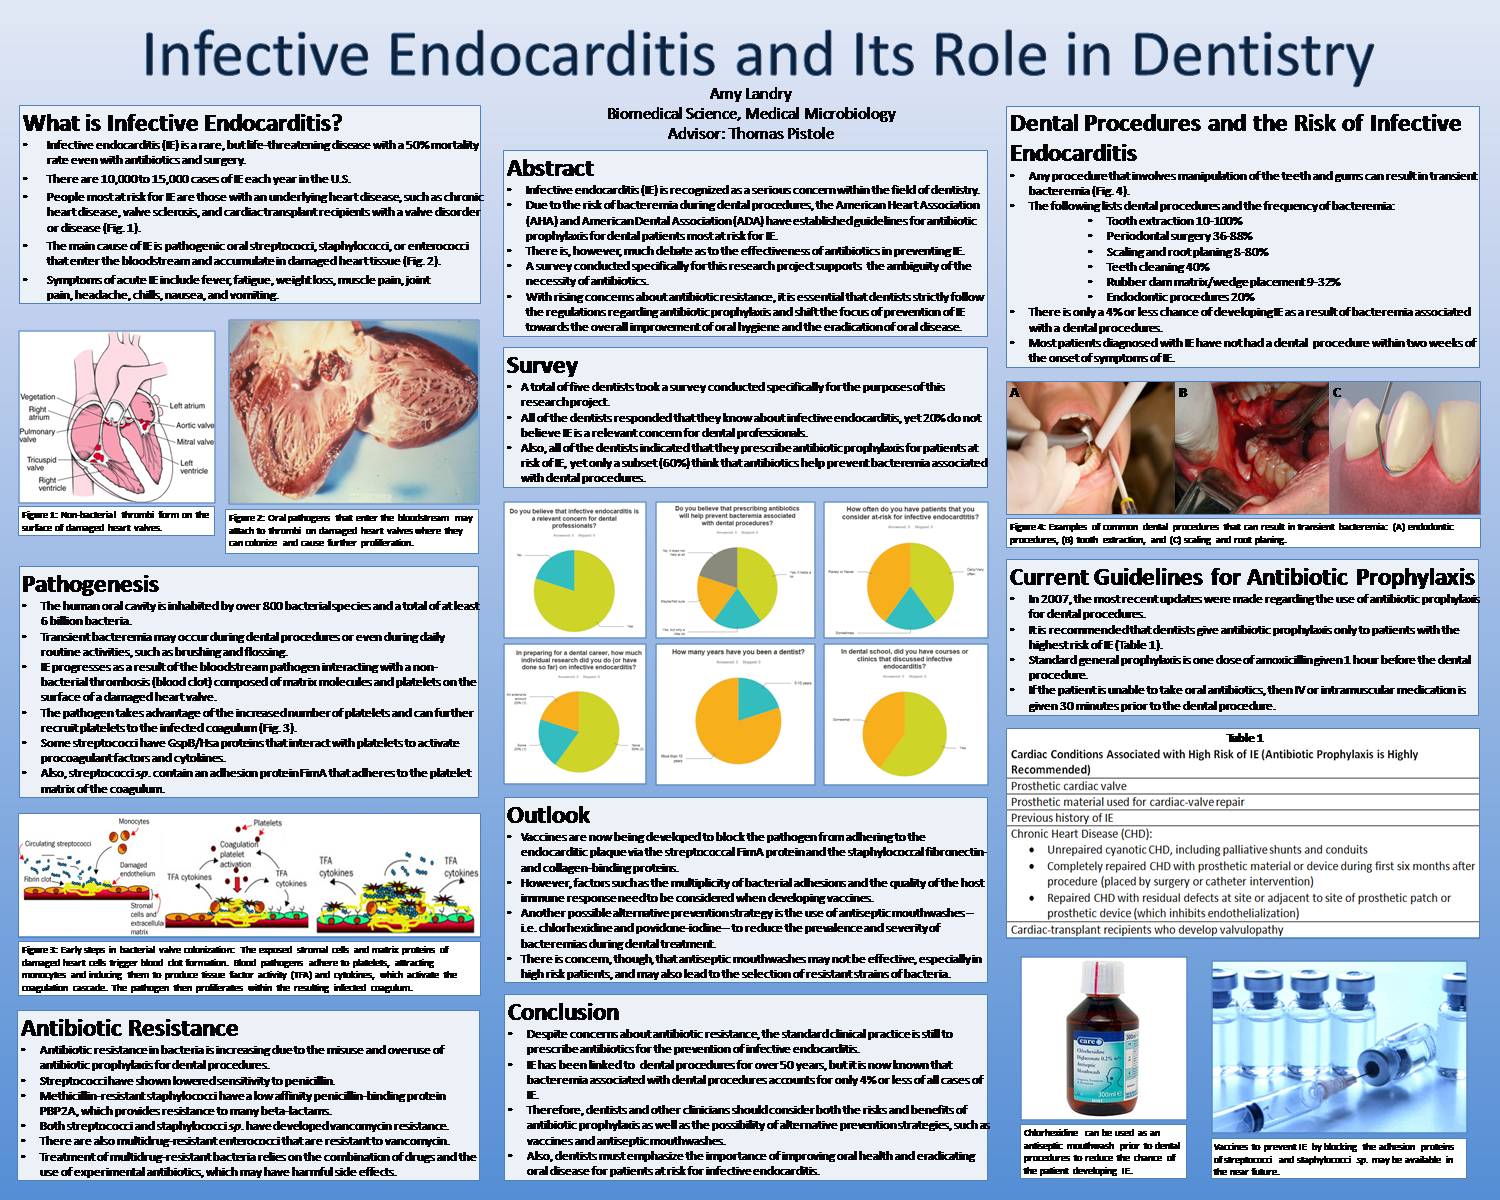 Infective Endocarditis And Its Role In Dentistry by amyelandry